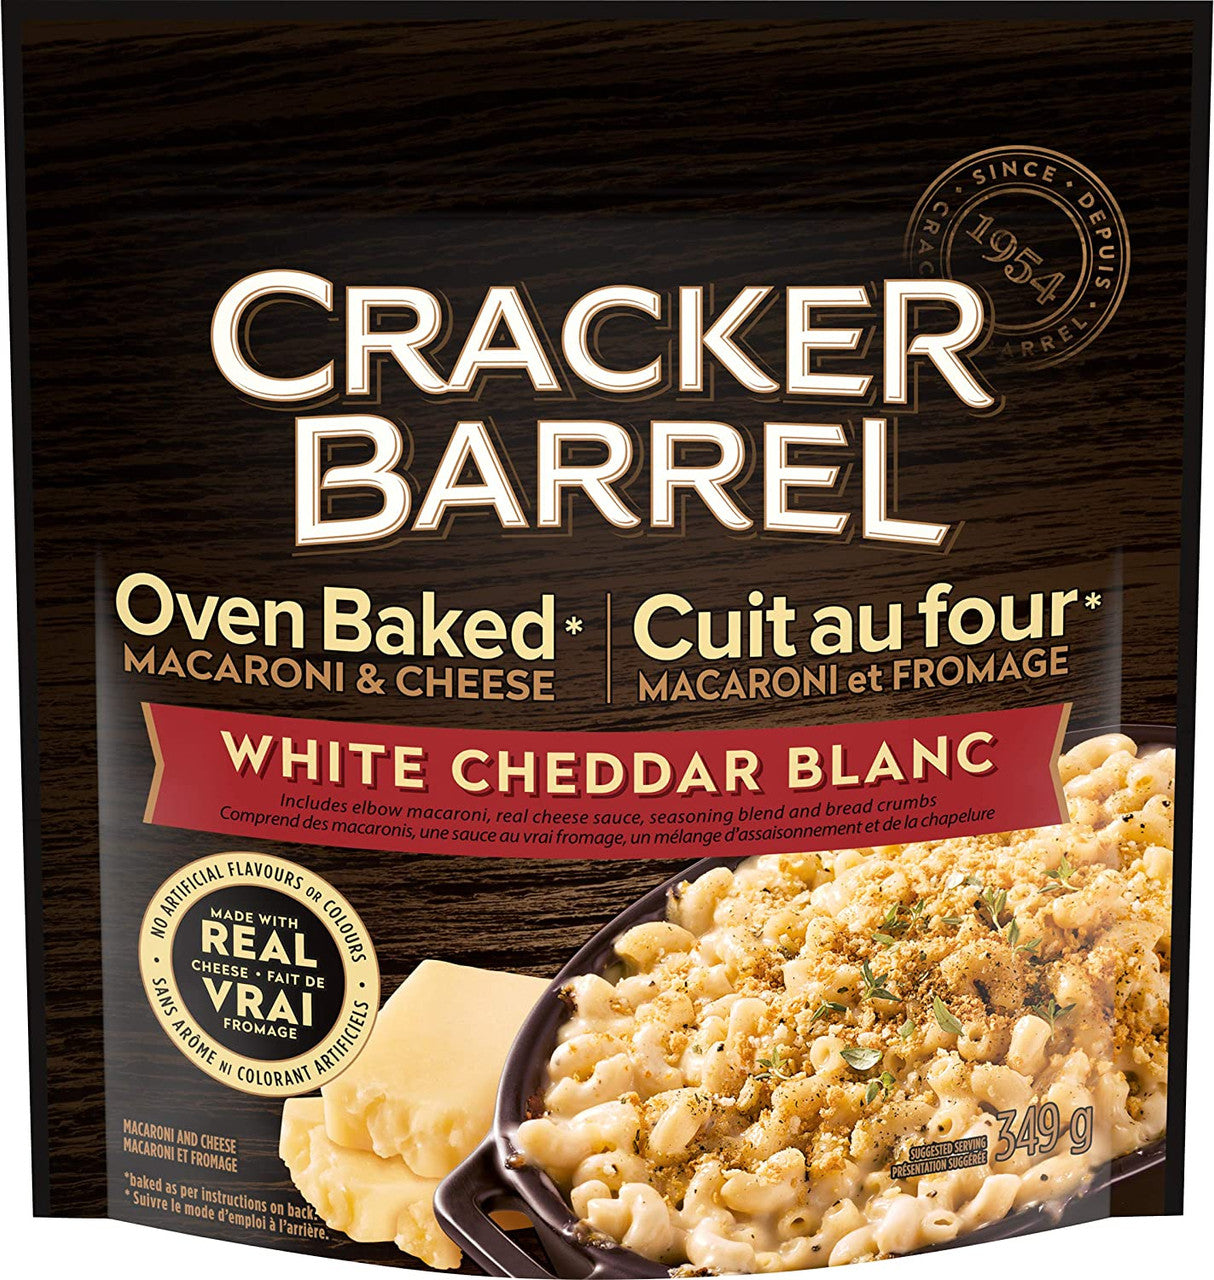 Cracker Barrel Oven Baked Macaroni & Cheese, White Cheddar Cheese, 349g/12 oz. Bag {Imported from Canada}